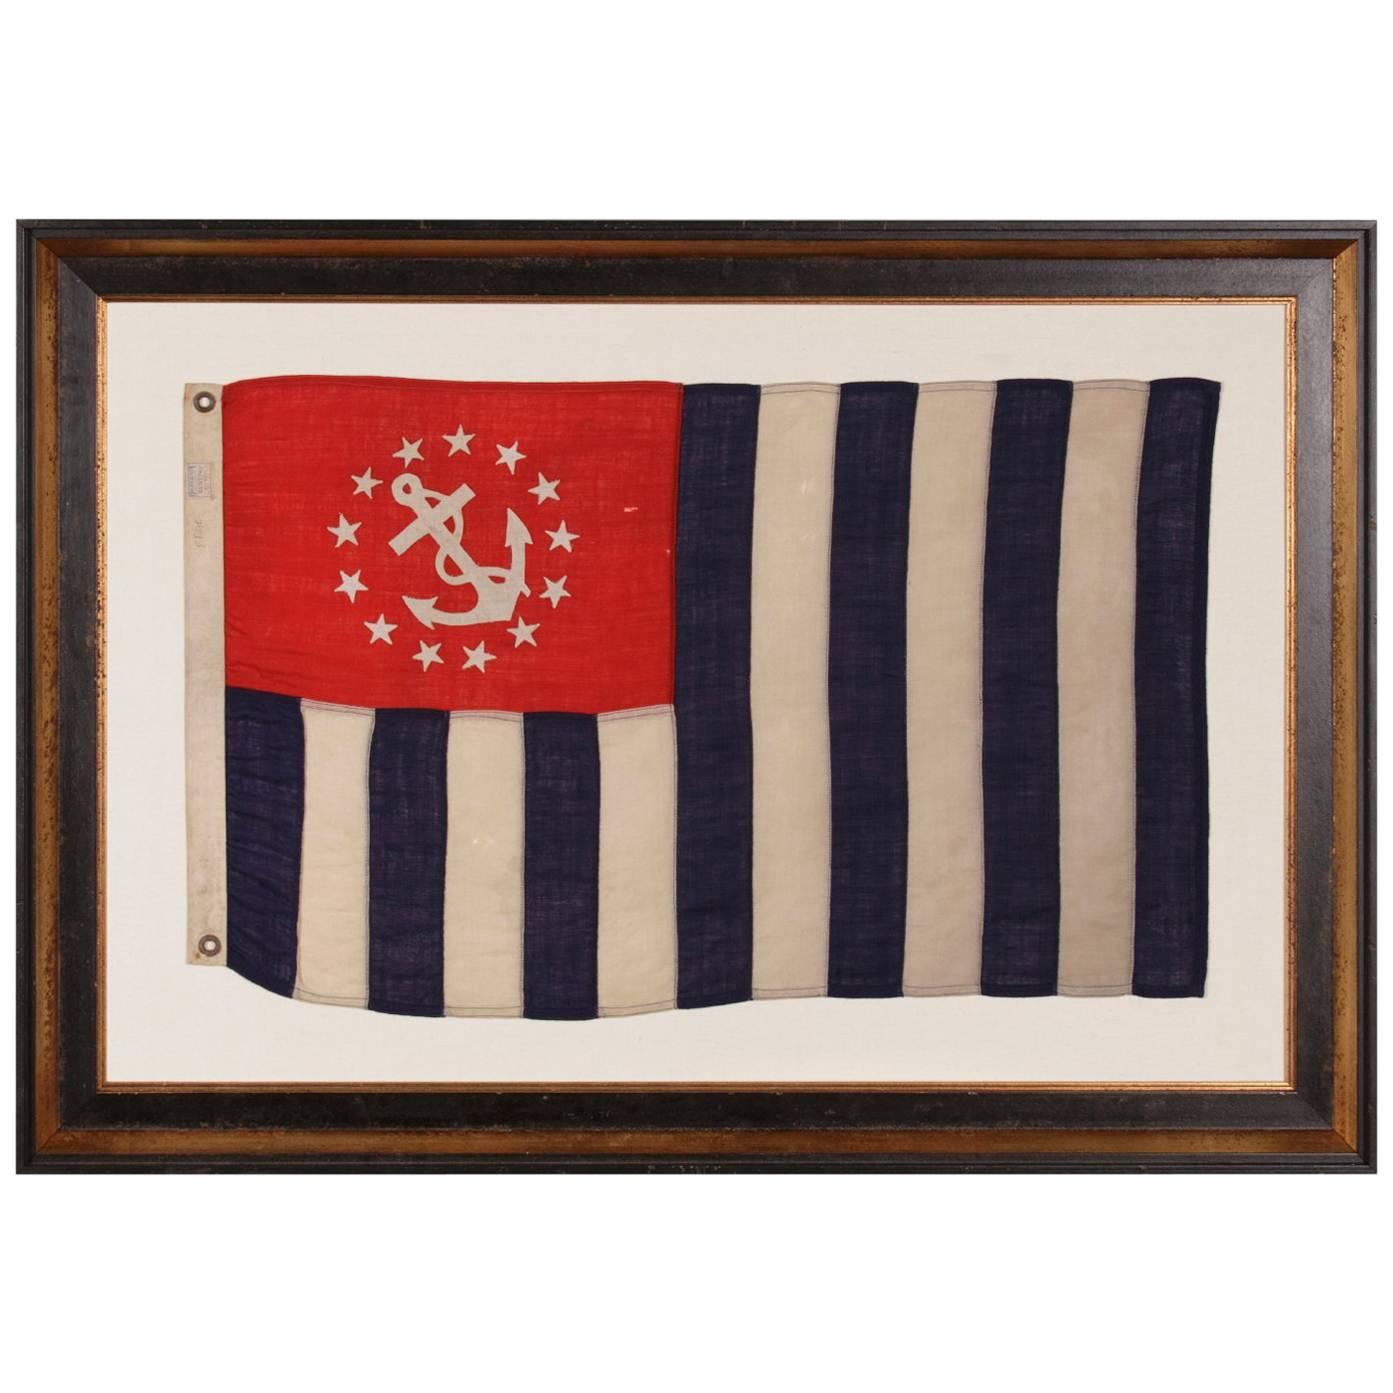 Power Squadrons Ensign Made By Annin in New York City, 1914-1920